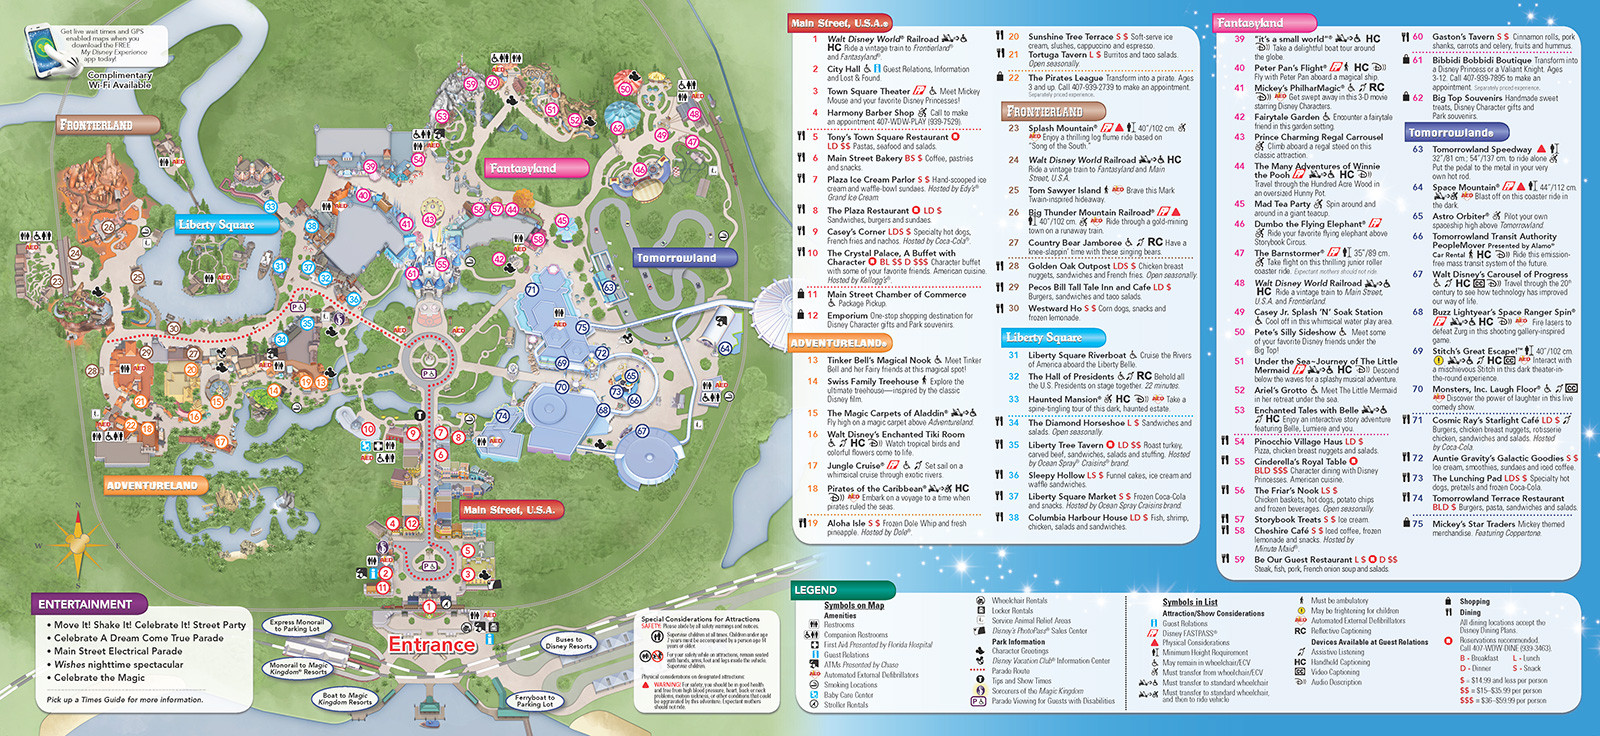 New 2013 Park Maps and Times Guides 4 of 20